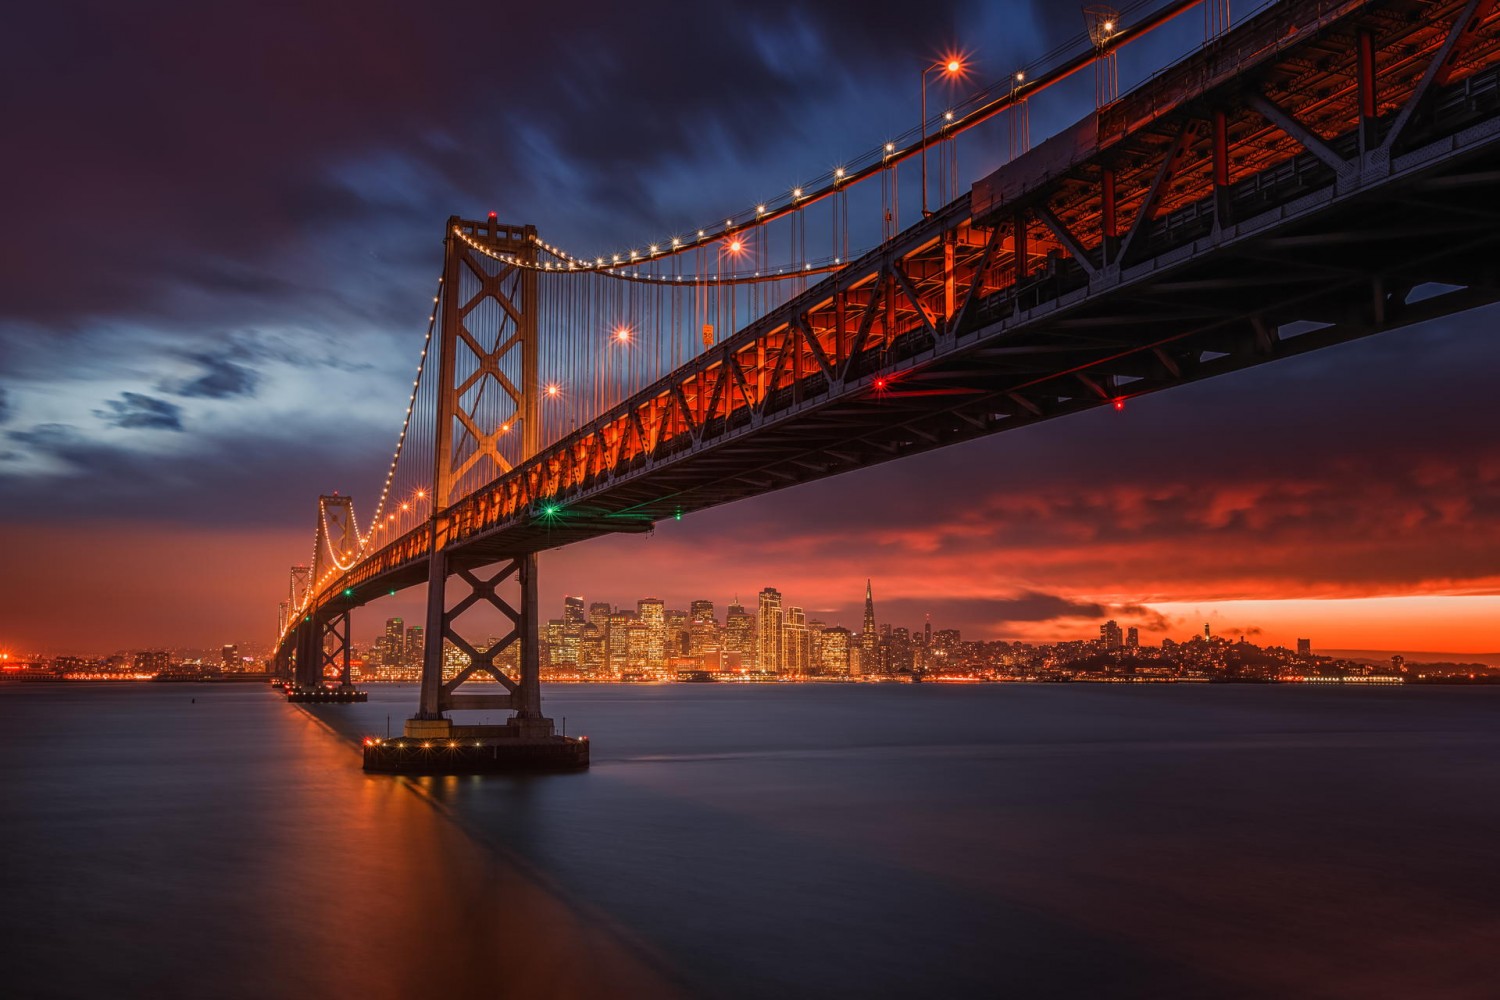 Explore San Francisco with Toby Harriman at 500px's January 24th Mobile Photowalk!